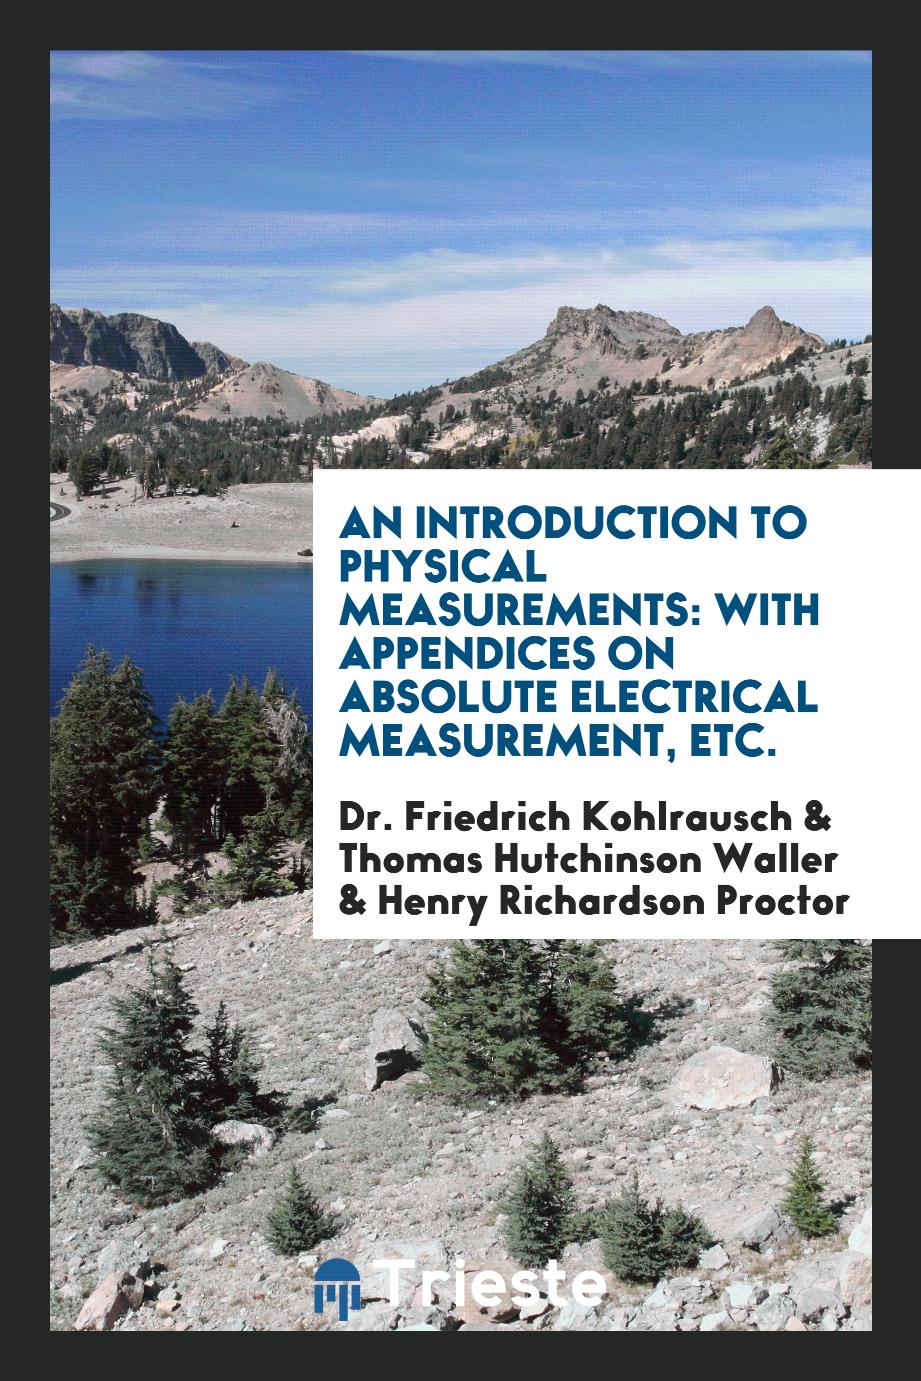 An Introduction to Physical Measurements: With Appendices on Absolute Electrical Measurement, Etc.